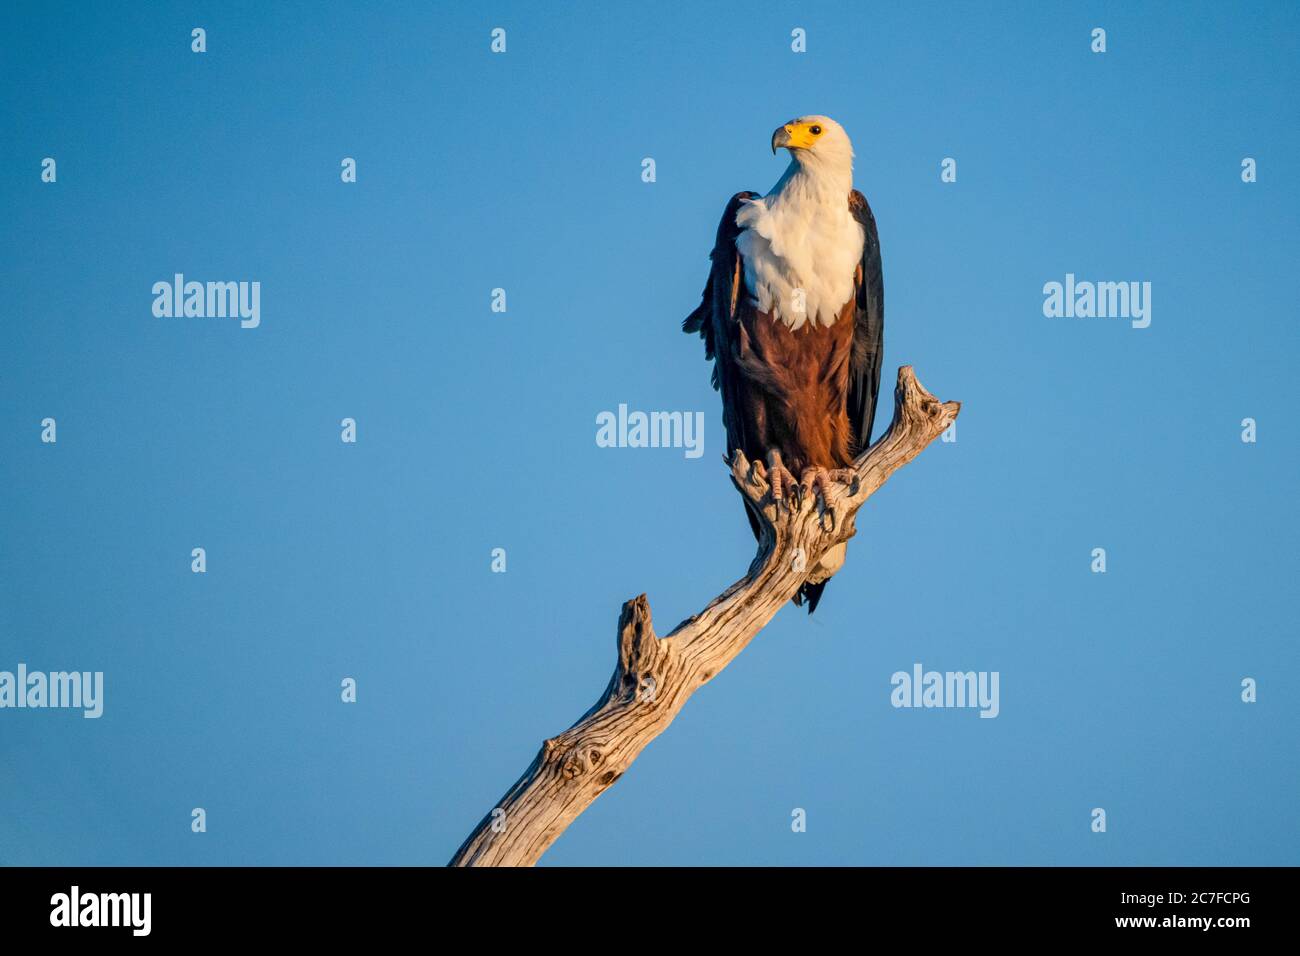 African fish eagle (Haliaeetus vocifer) perched on a tree. with a brilliant blue sky background. This bird is found in sub-Saharan Africa near water. Stock Photo